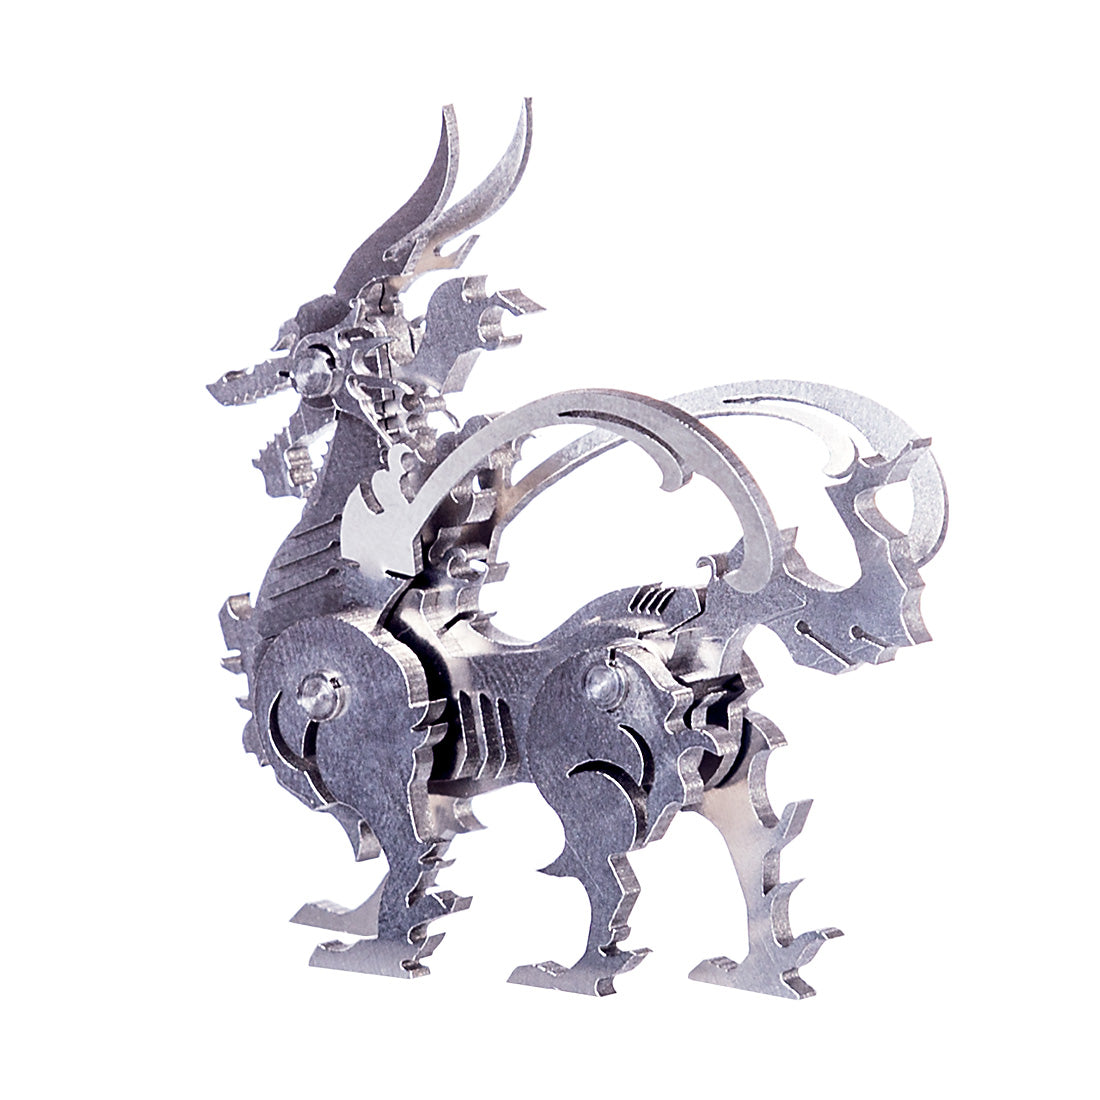 4PCS DIY 3D Assembly Stainless Steel Fox Elk Beast Unicorn Puzzle Toy Model